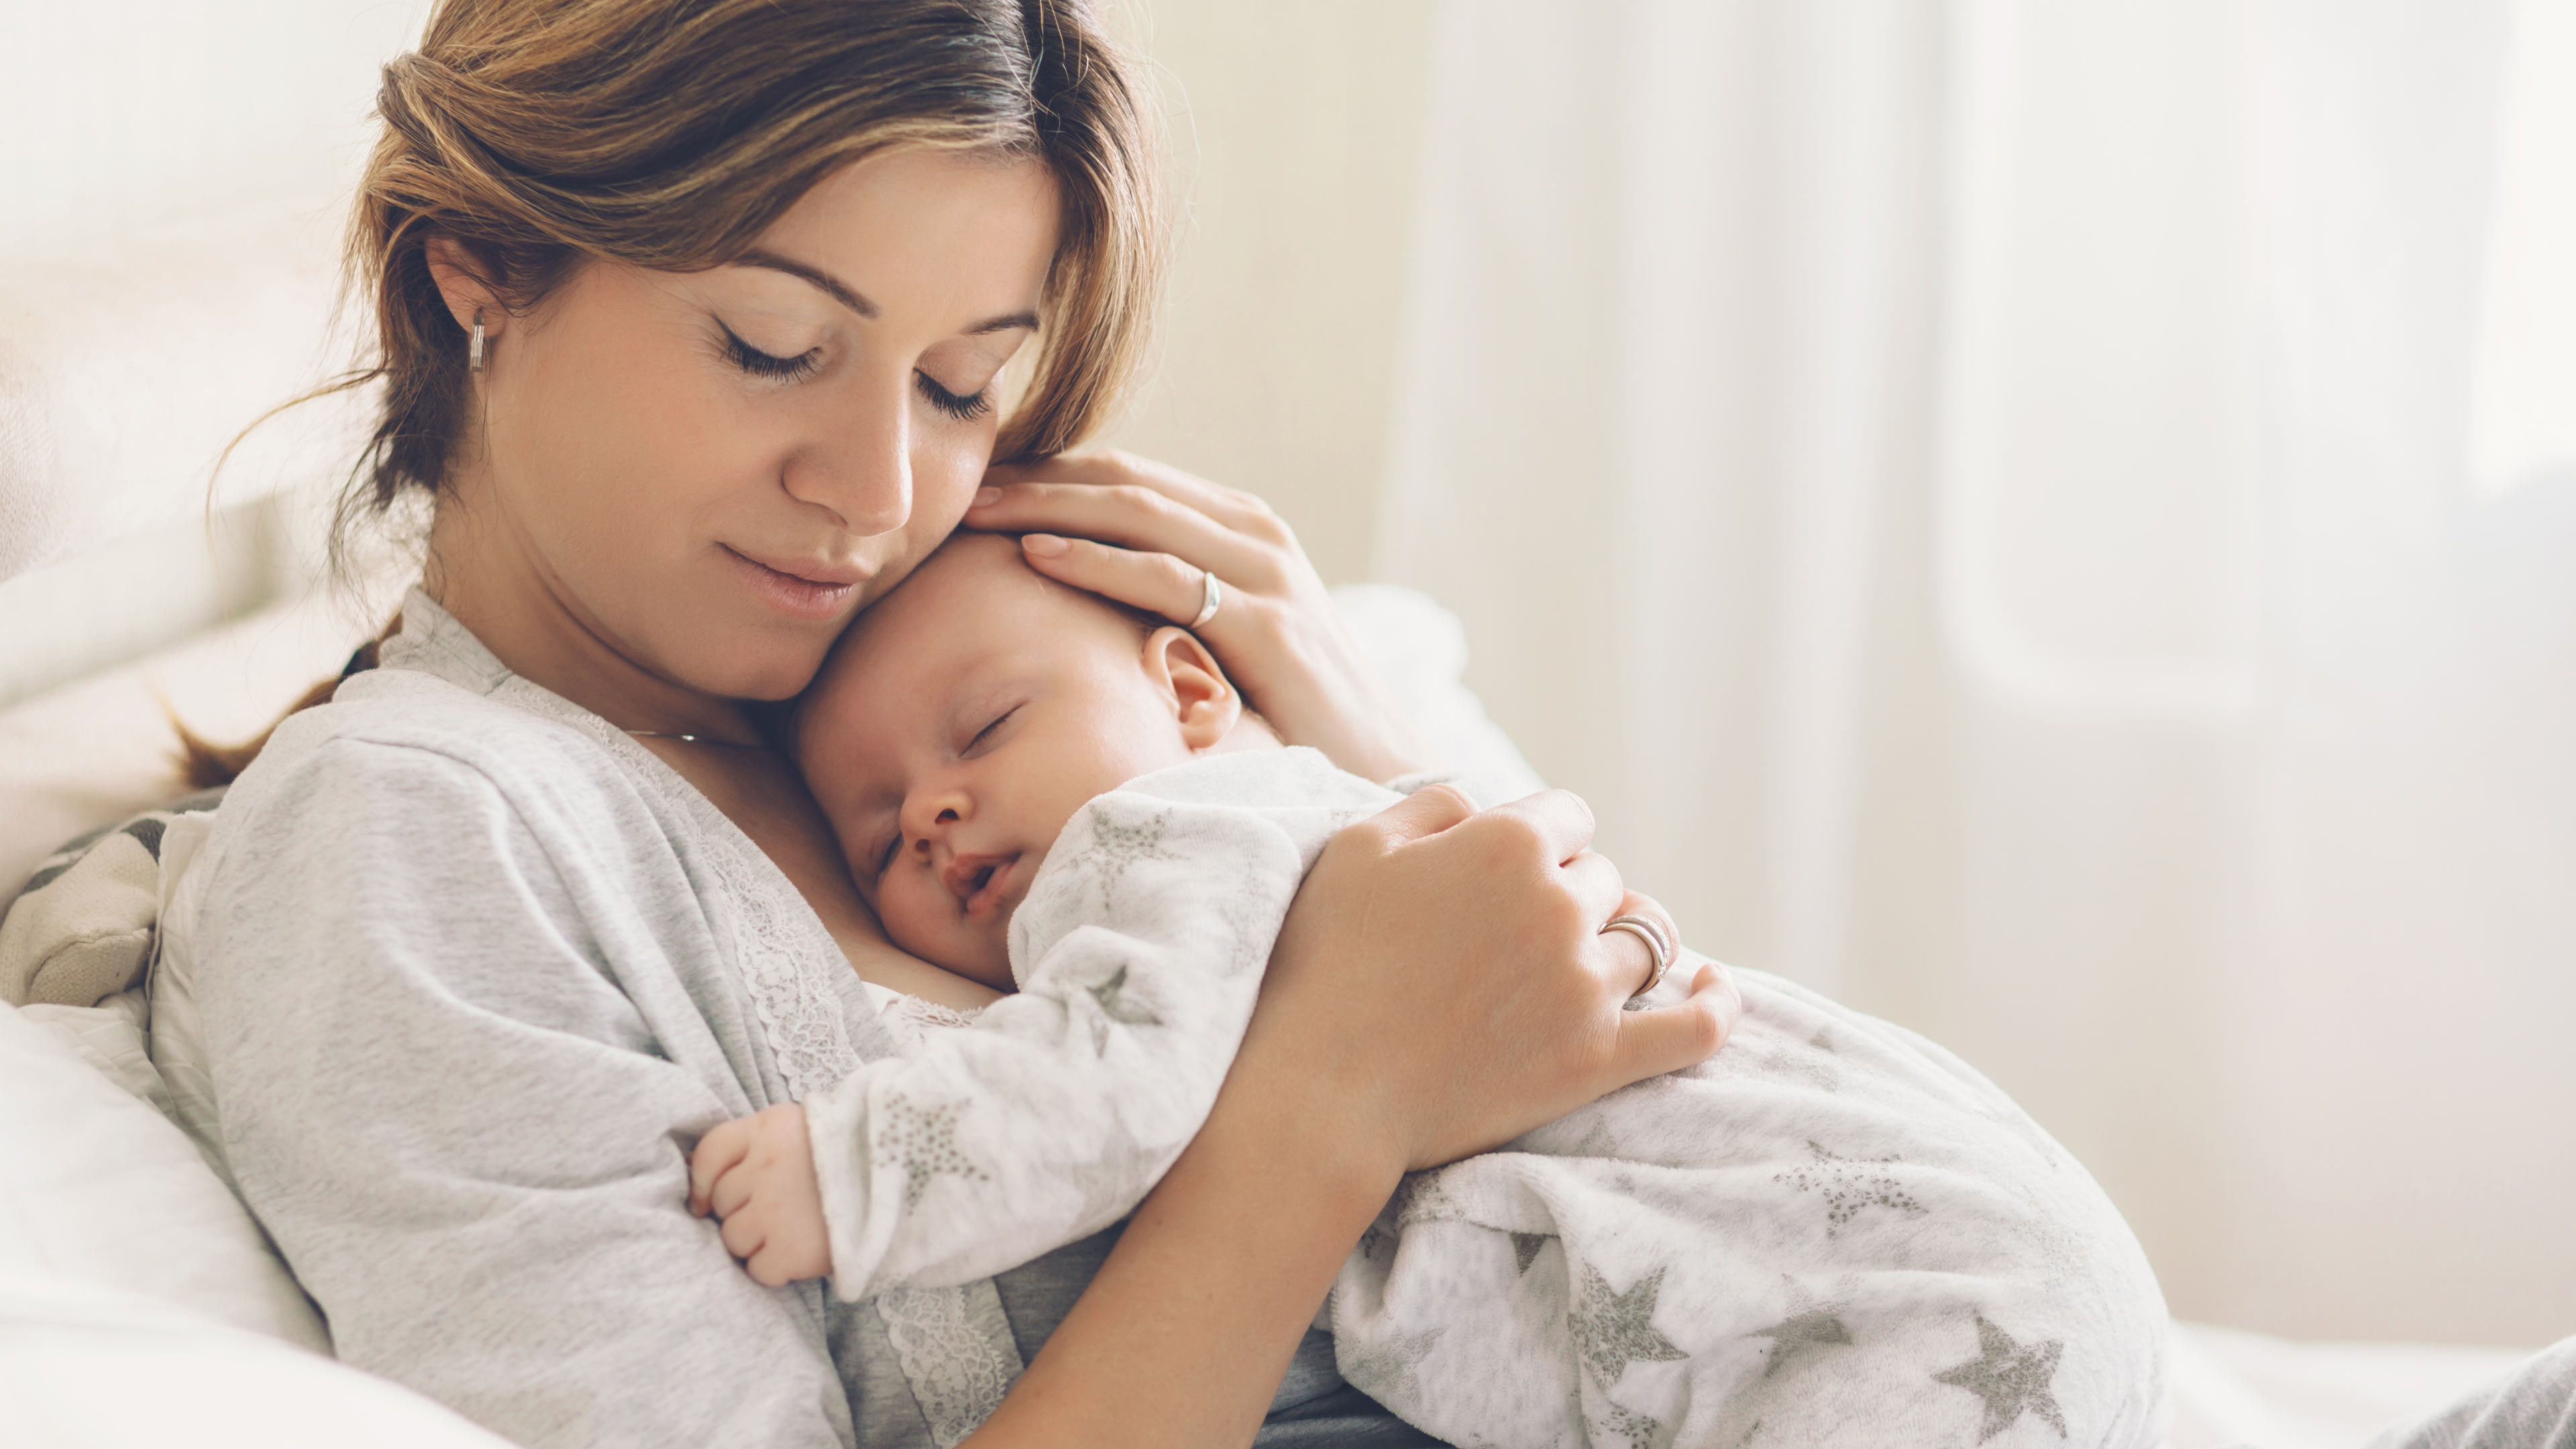 Your Postpartum Care Plan: How to Stay Healthy During the 4th